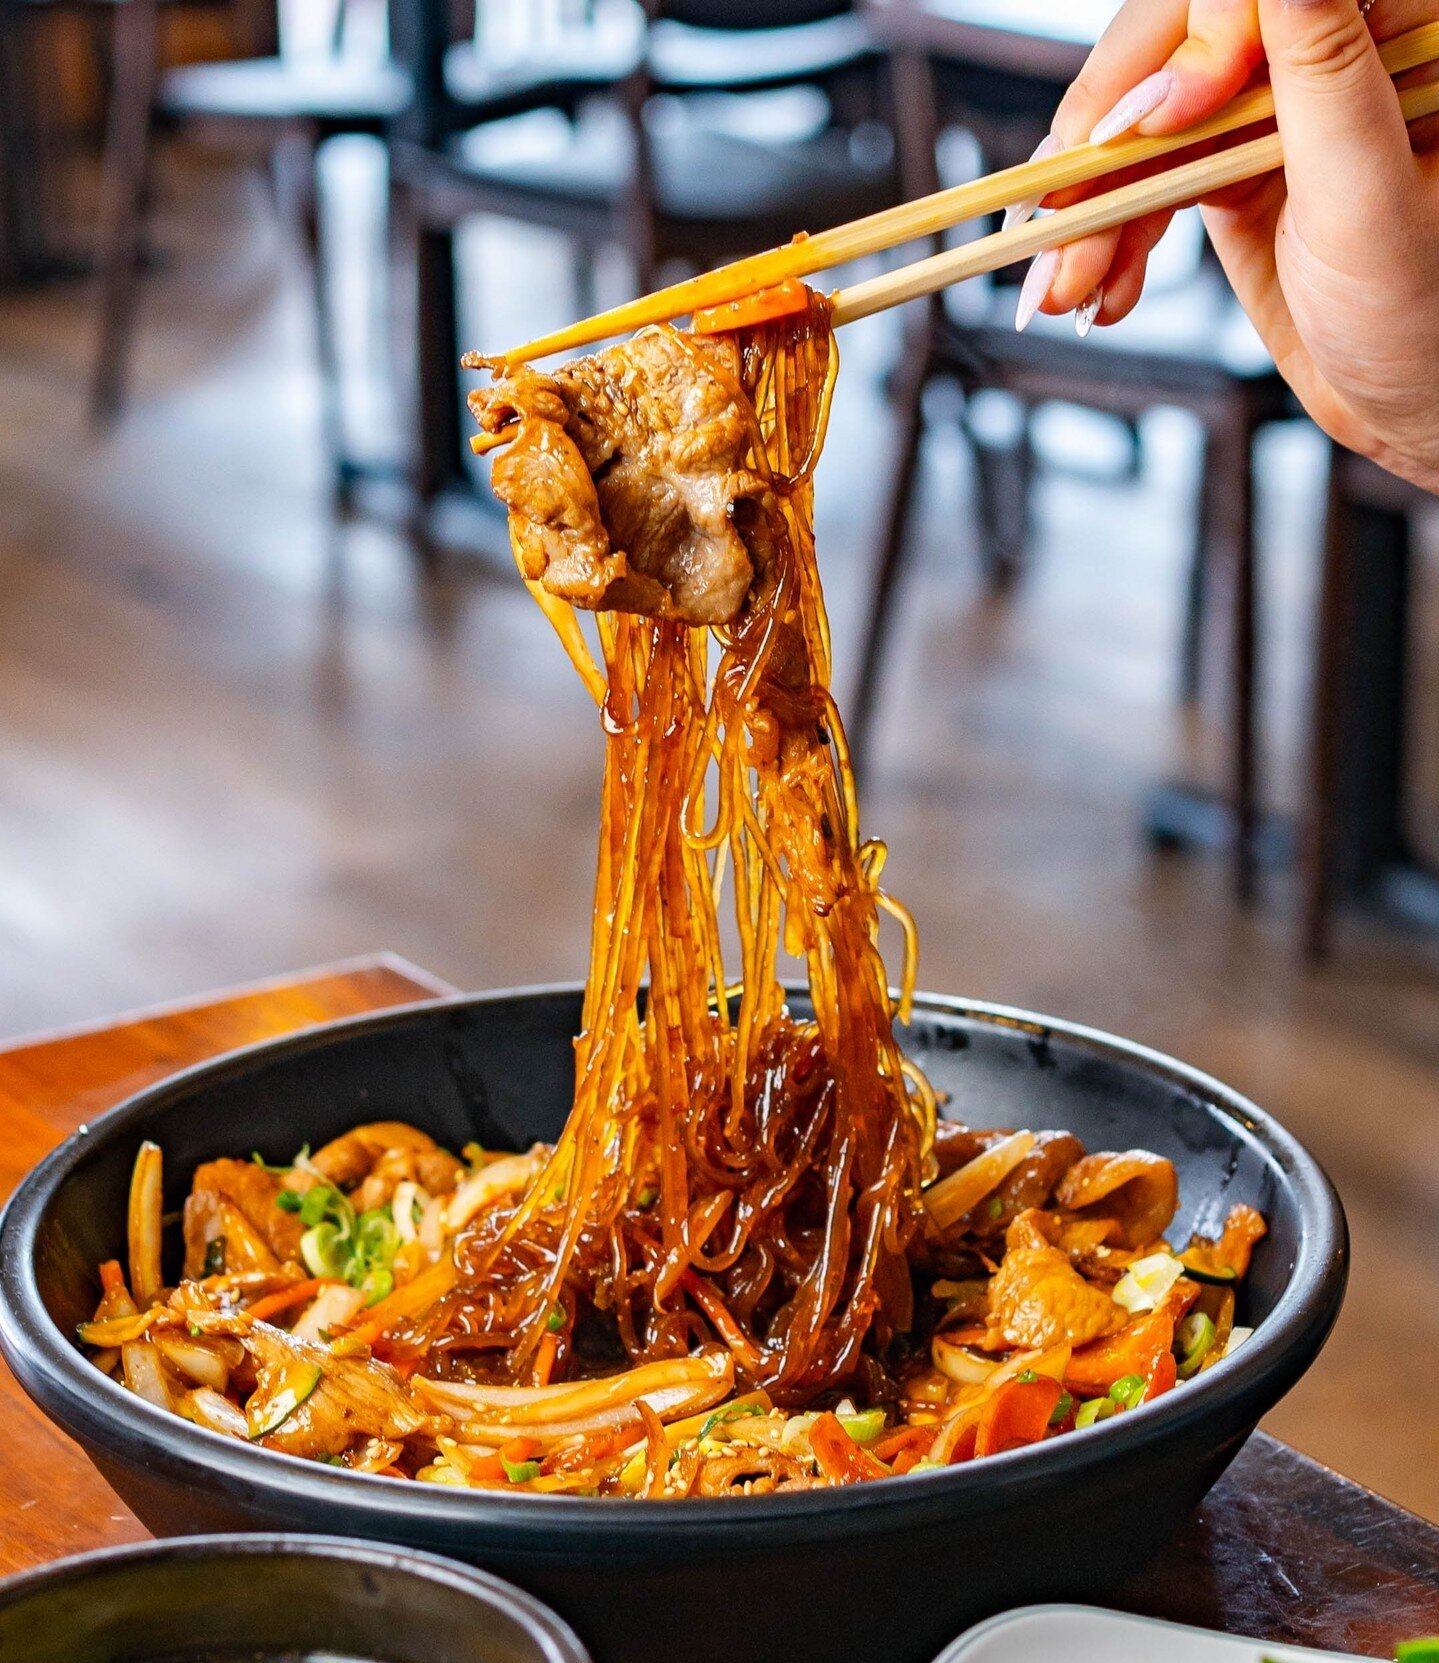 Glass noodles fill your tummy.🤤 Japchae is a traditional Korean dish filled with meat and a variety of noodles.❤️&zwj;🔥⁠
📍SongHak Korean BBQ - San Diego: 4681 Convoy St, San Diego, CA 92111⁠
.⁠
.⁠
#sdfoodie #yelpsandiego #sandiegoeats #sandiegoliv